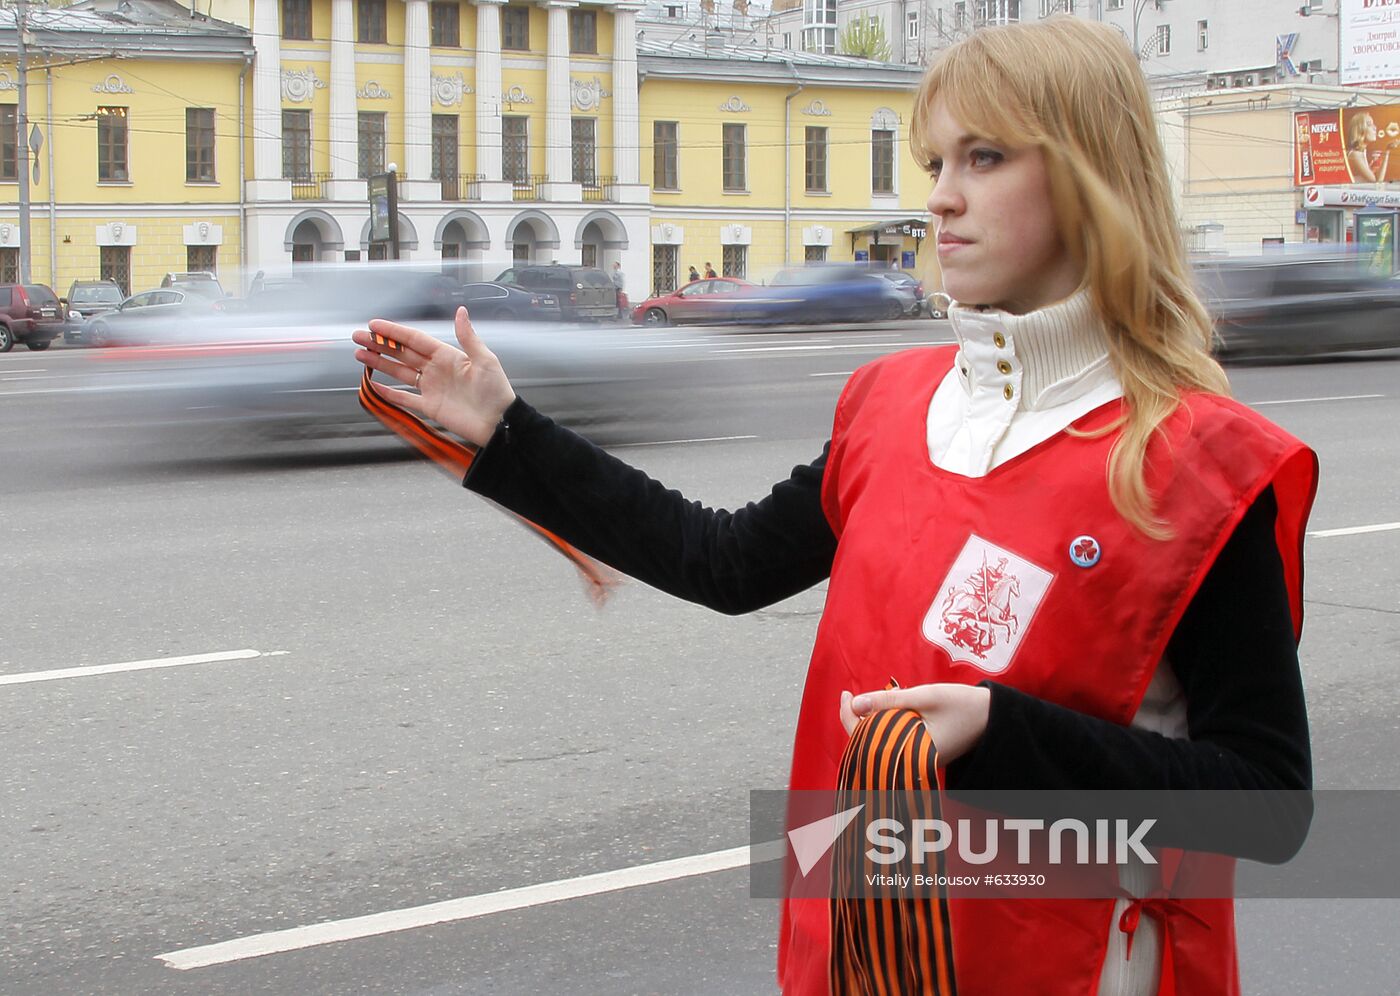 St. George's Ribbon campaign kicks off in Moscow